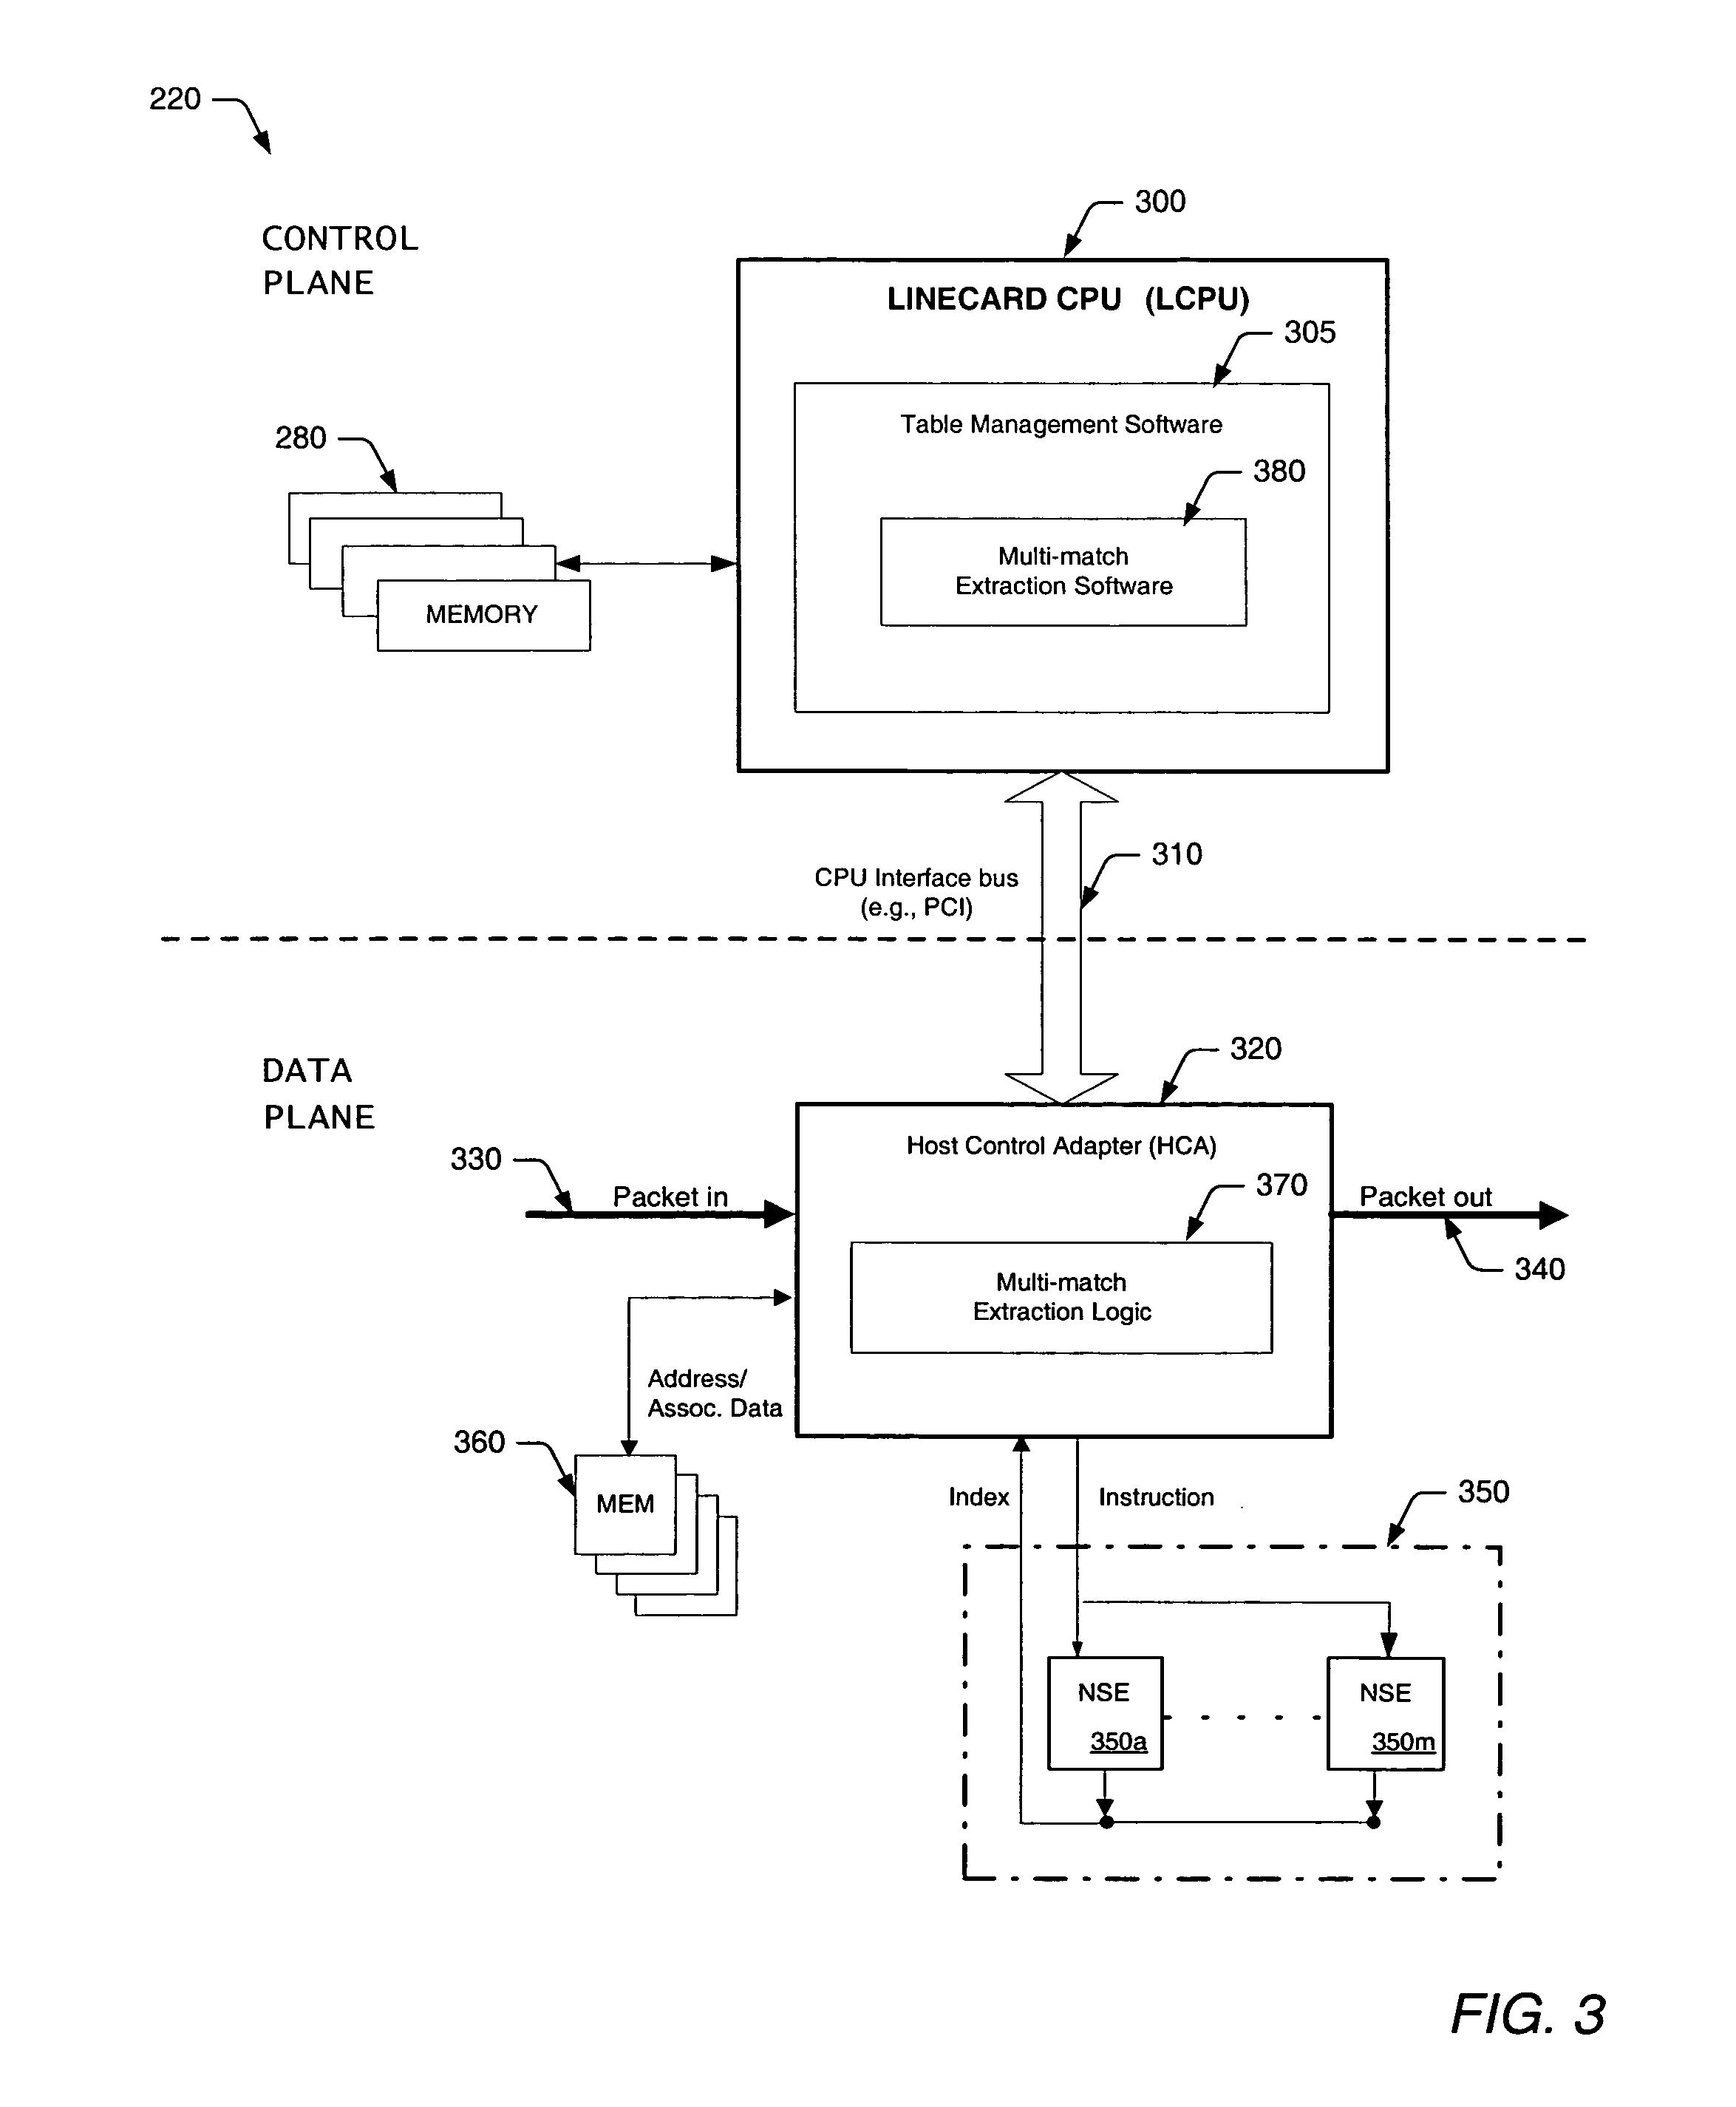 Circuit, apparatus, and method for extracting multiple matching entries from a content addressable memory (CAM) device